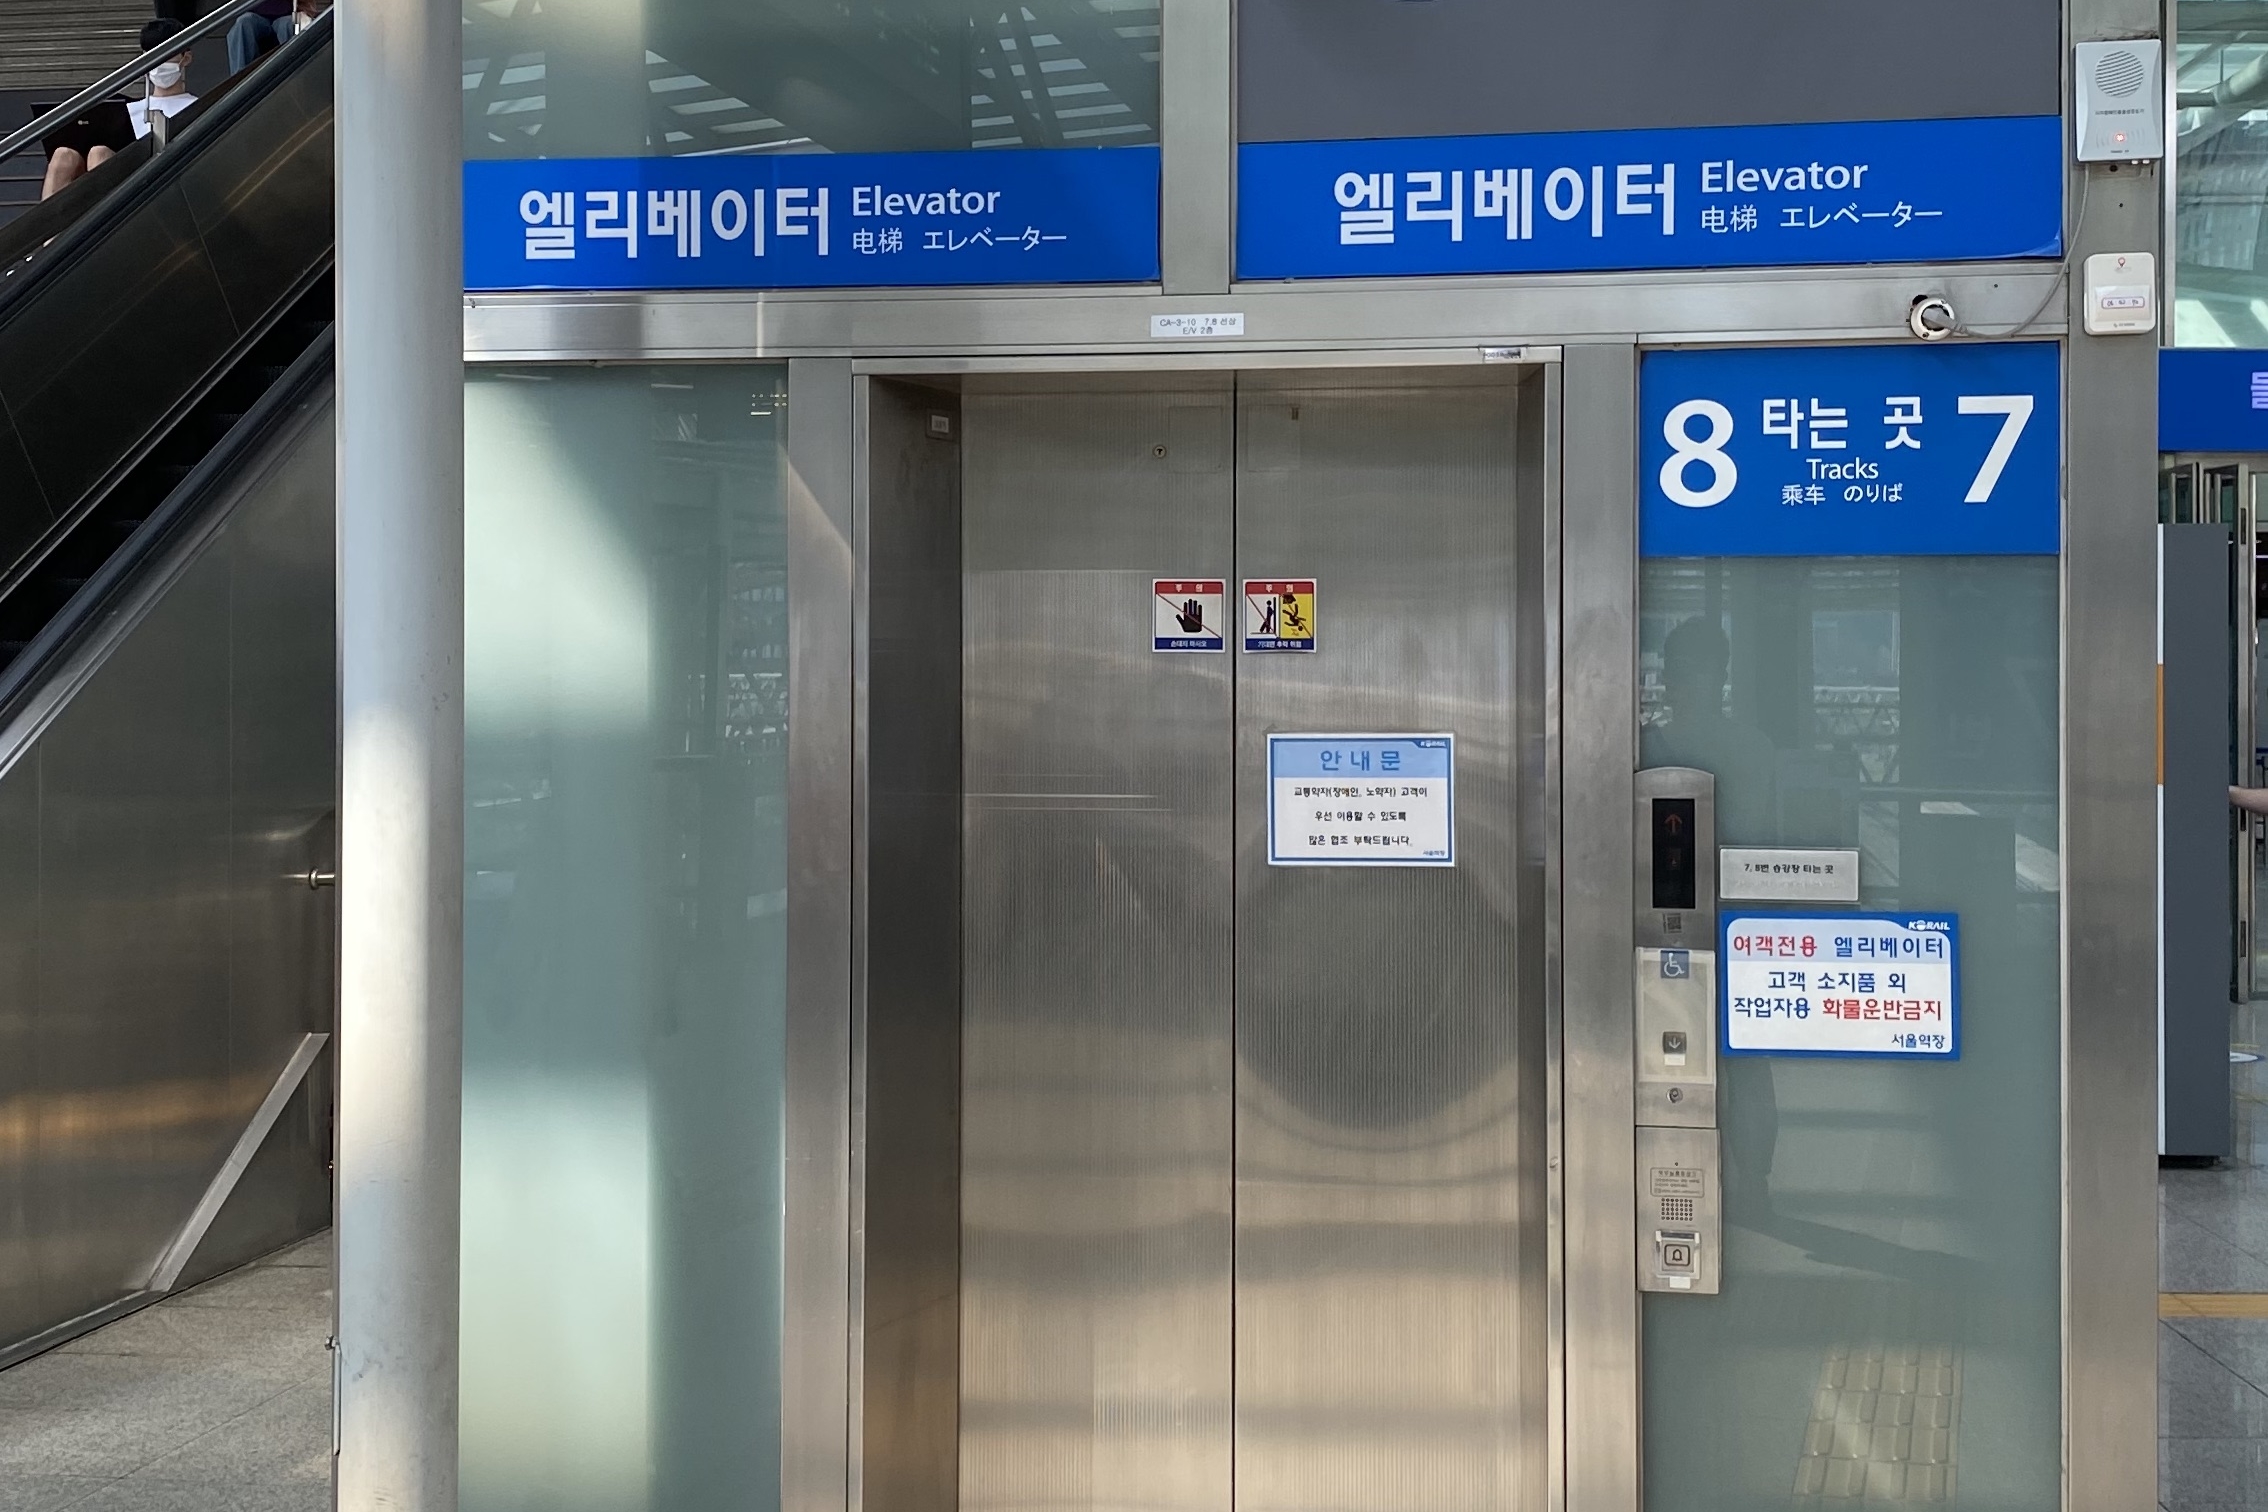 Elevators0 : Highly accessible for the elderly and disabled due to the use of elevator